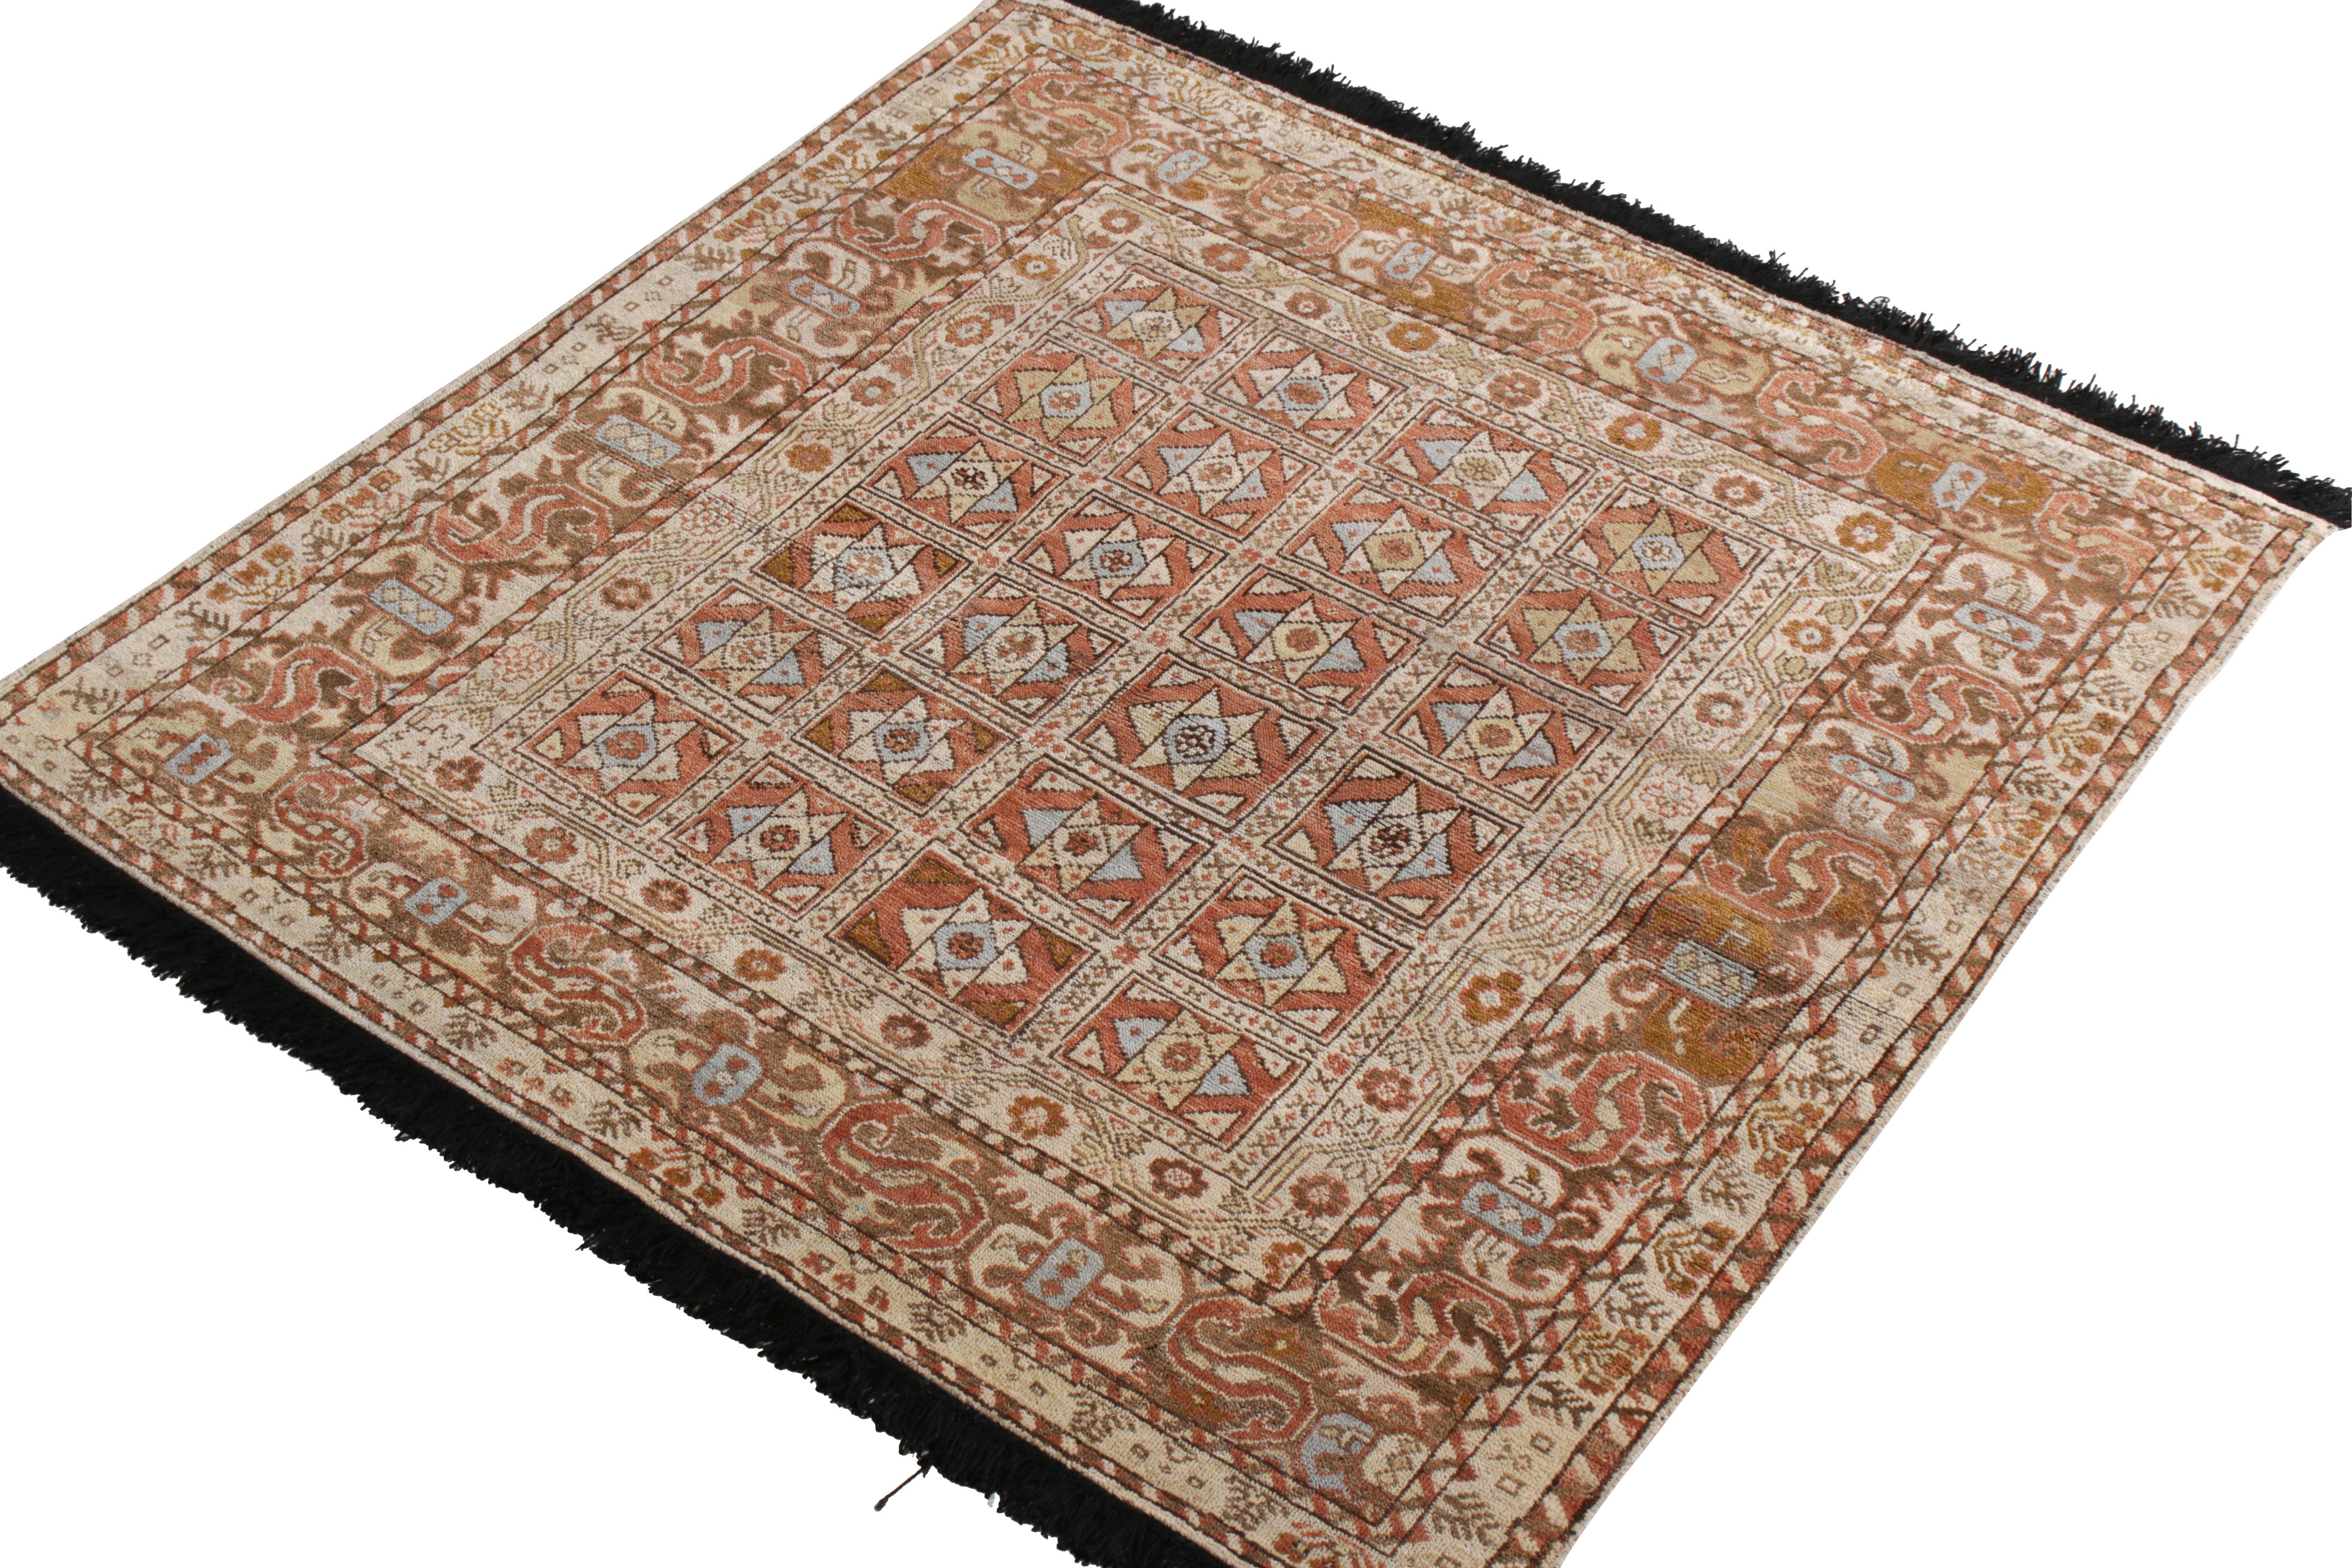 Indian Rug & Kilim’s Tribal Style Rug in Beige-Brown All Over Geometric Pattern For Sale